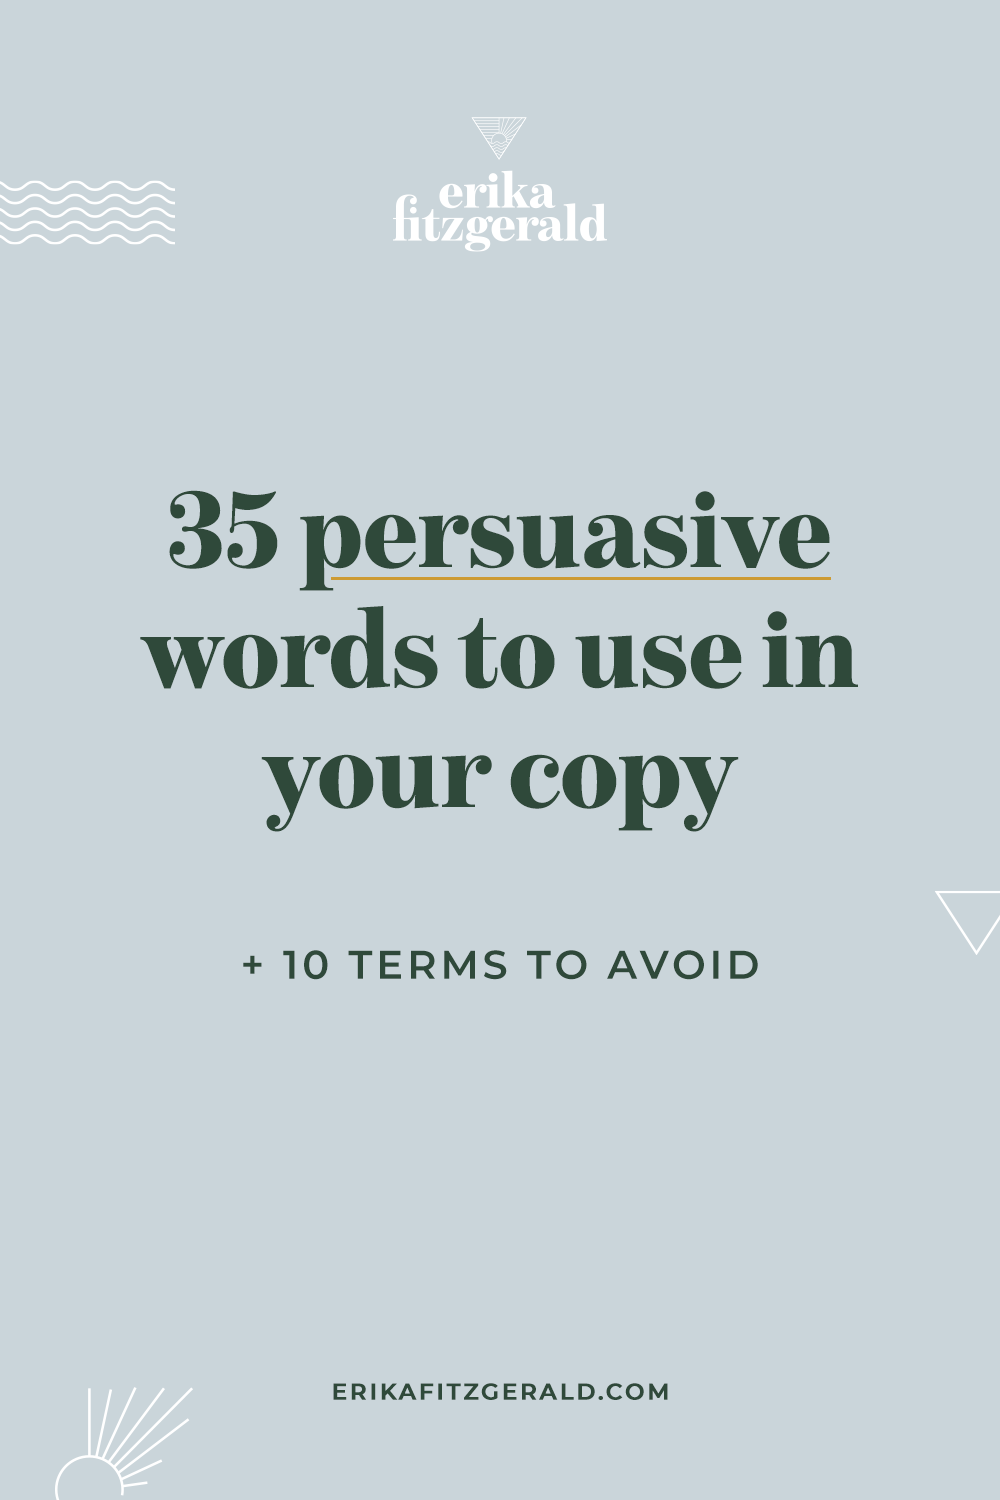 Persuasive words and phrases to use in your copy